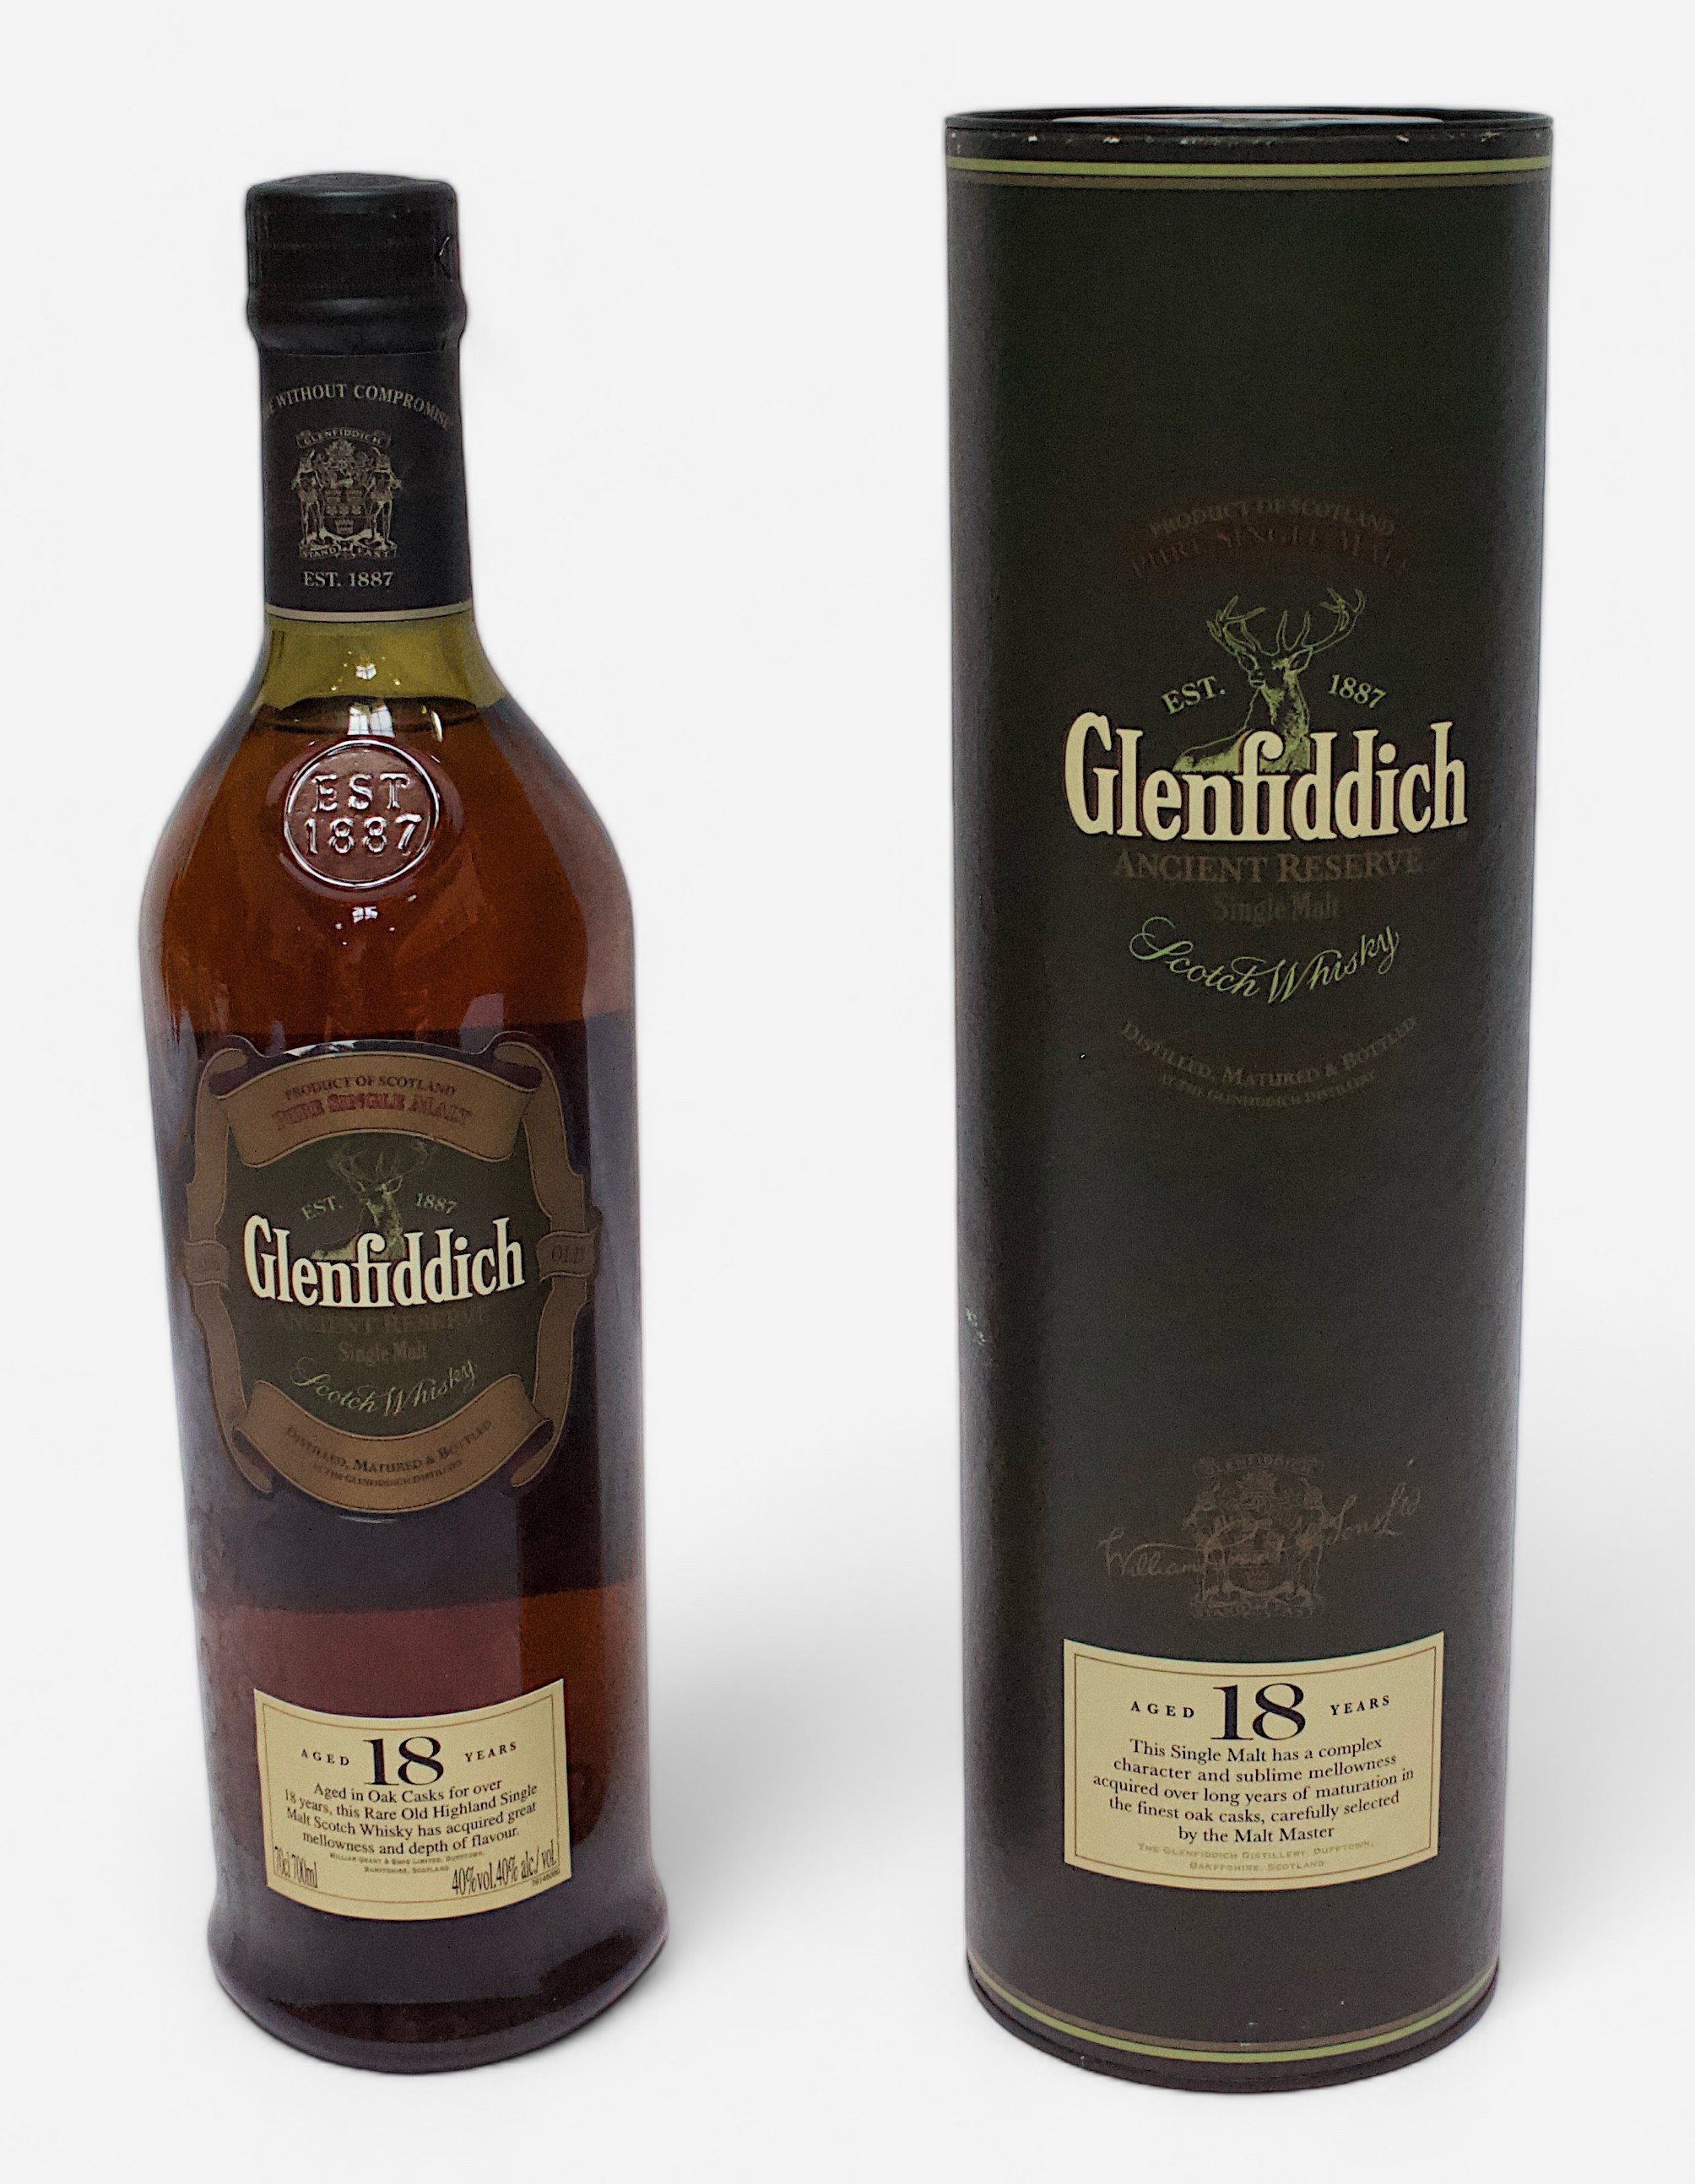 A bottle of Glenfiddich Ancient Reserve Pure Single Malt Scotch Whisky, Aged 18 Years, 70cl, 40%